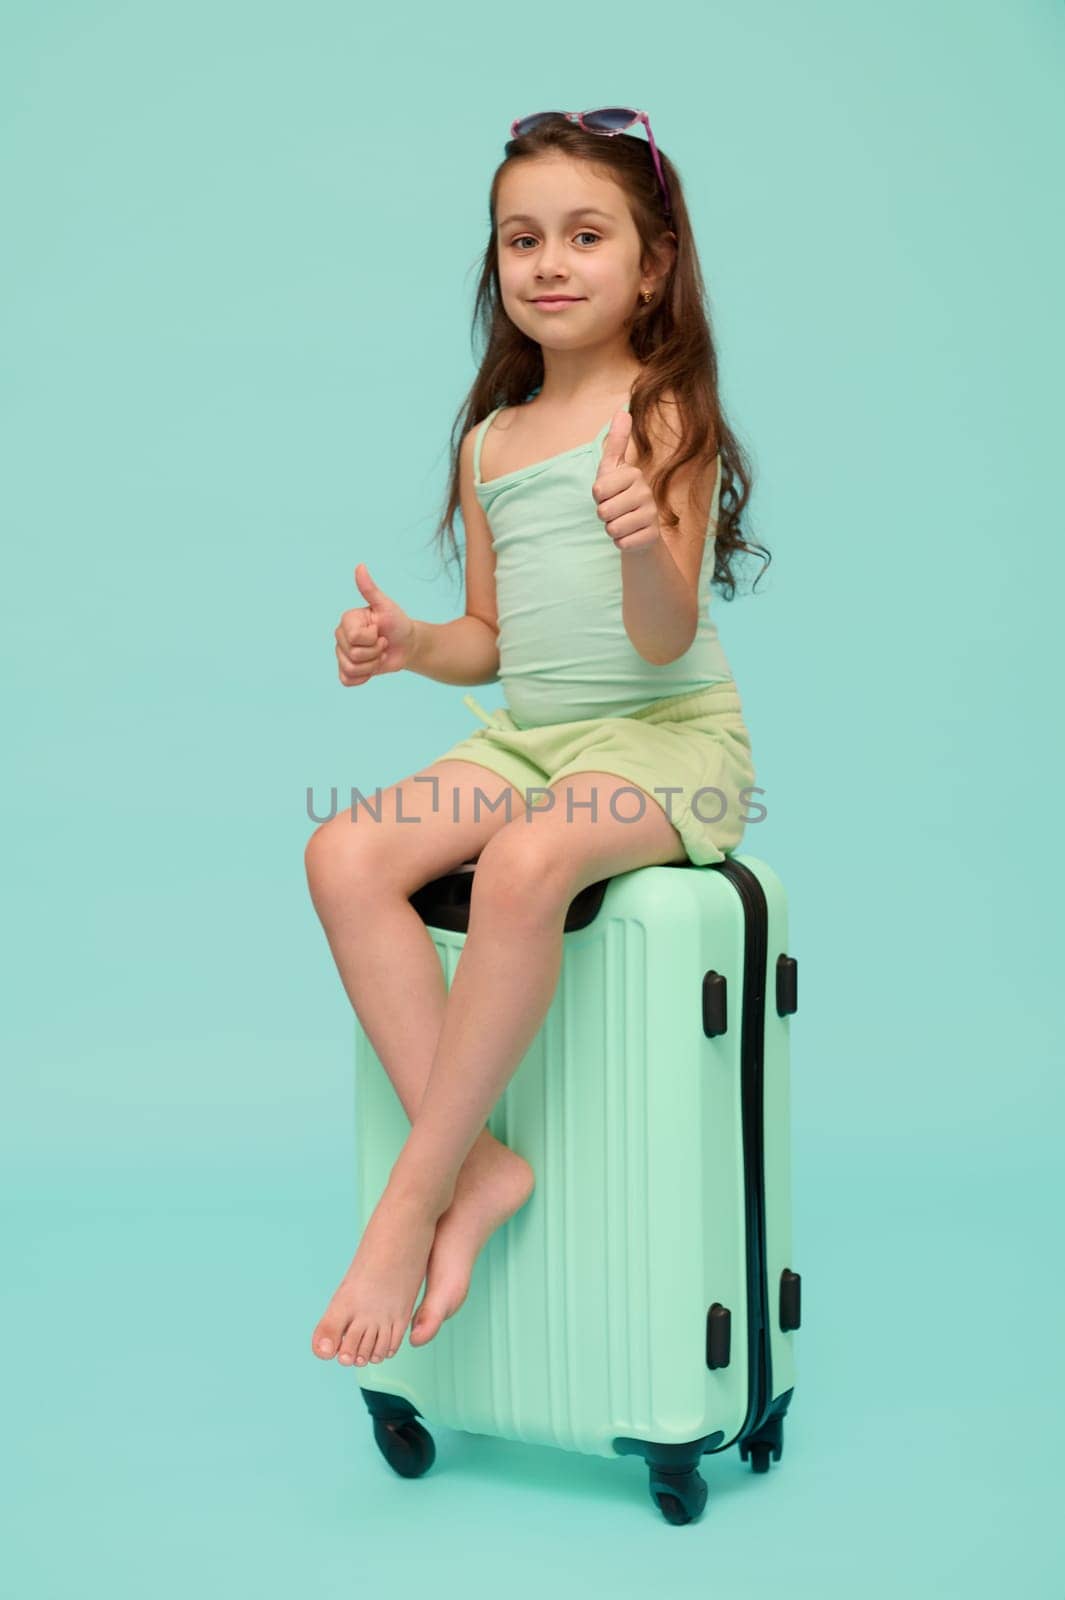 Emotional authentic little traveler girl, going for summer holidays, thumbs up, smiles looking at camera, sitting on her polycarbonate trendy suitcase of turquoise color, isolated over blue background